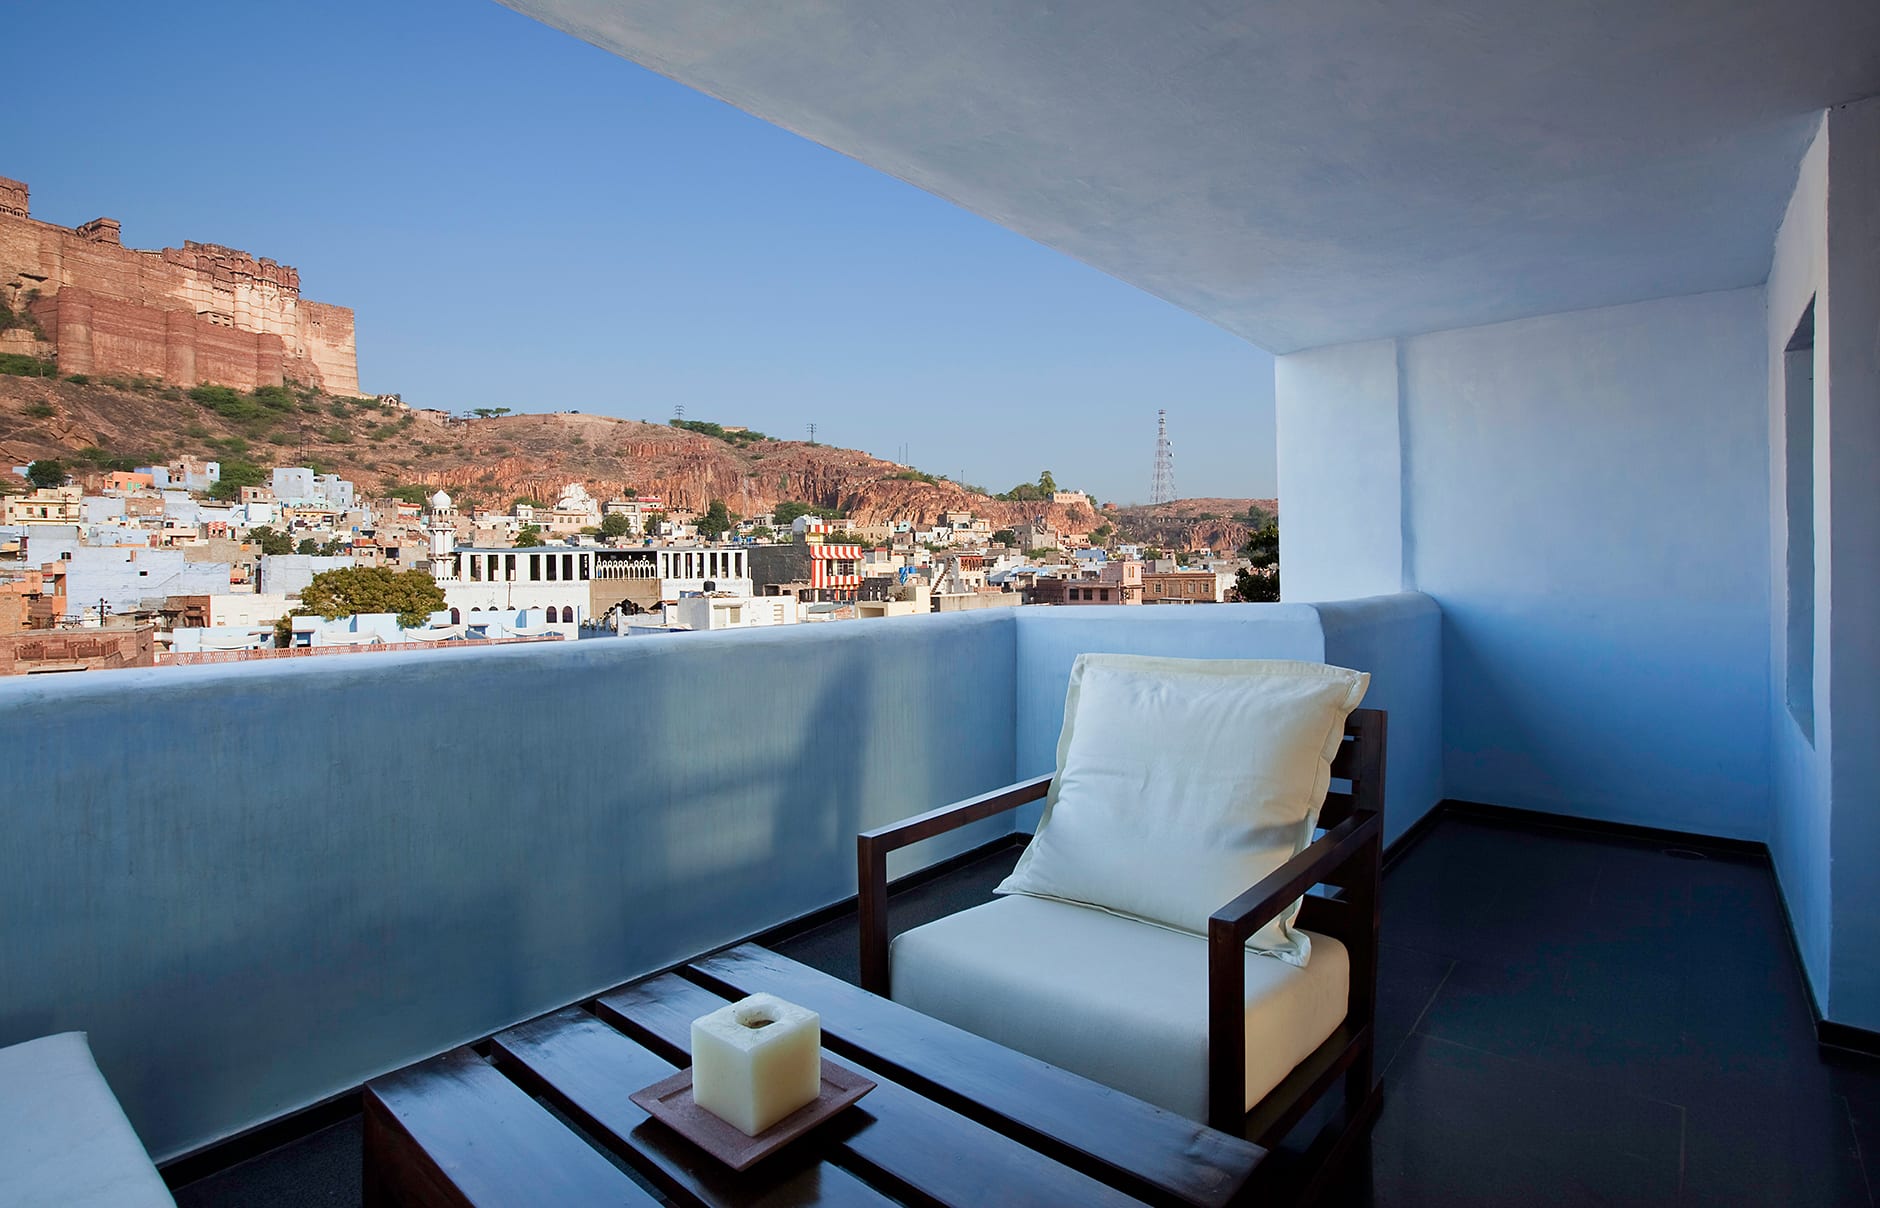 Duplex Suite. Raas Jodhpur, India. Luxury Hotel Review by TravelPlusStyle. Photo © Rass